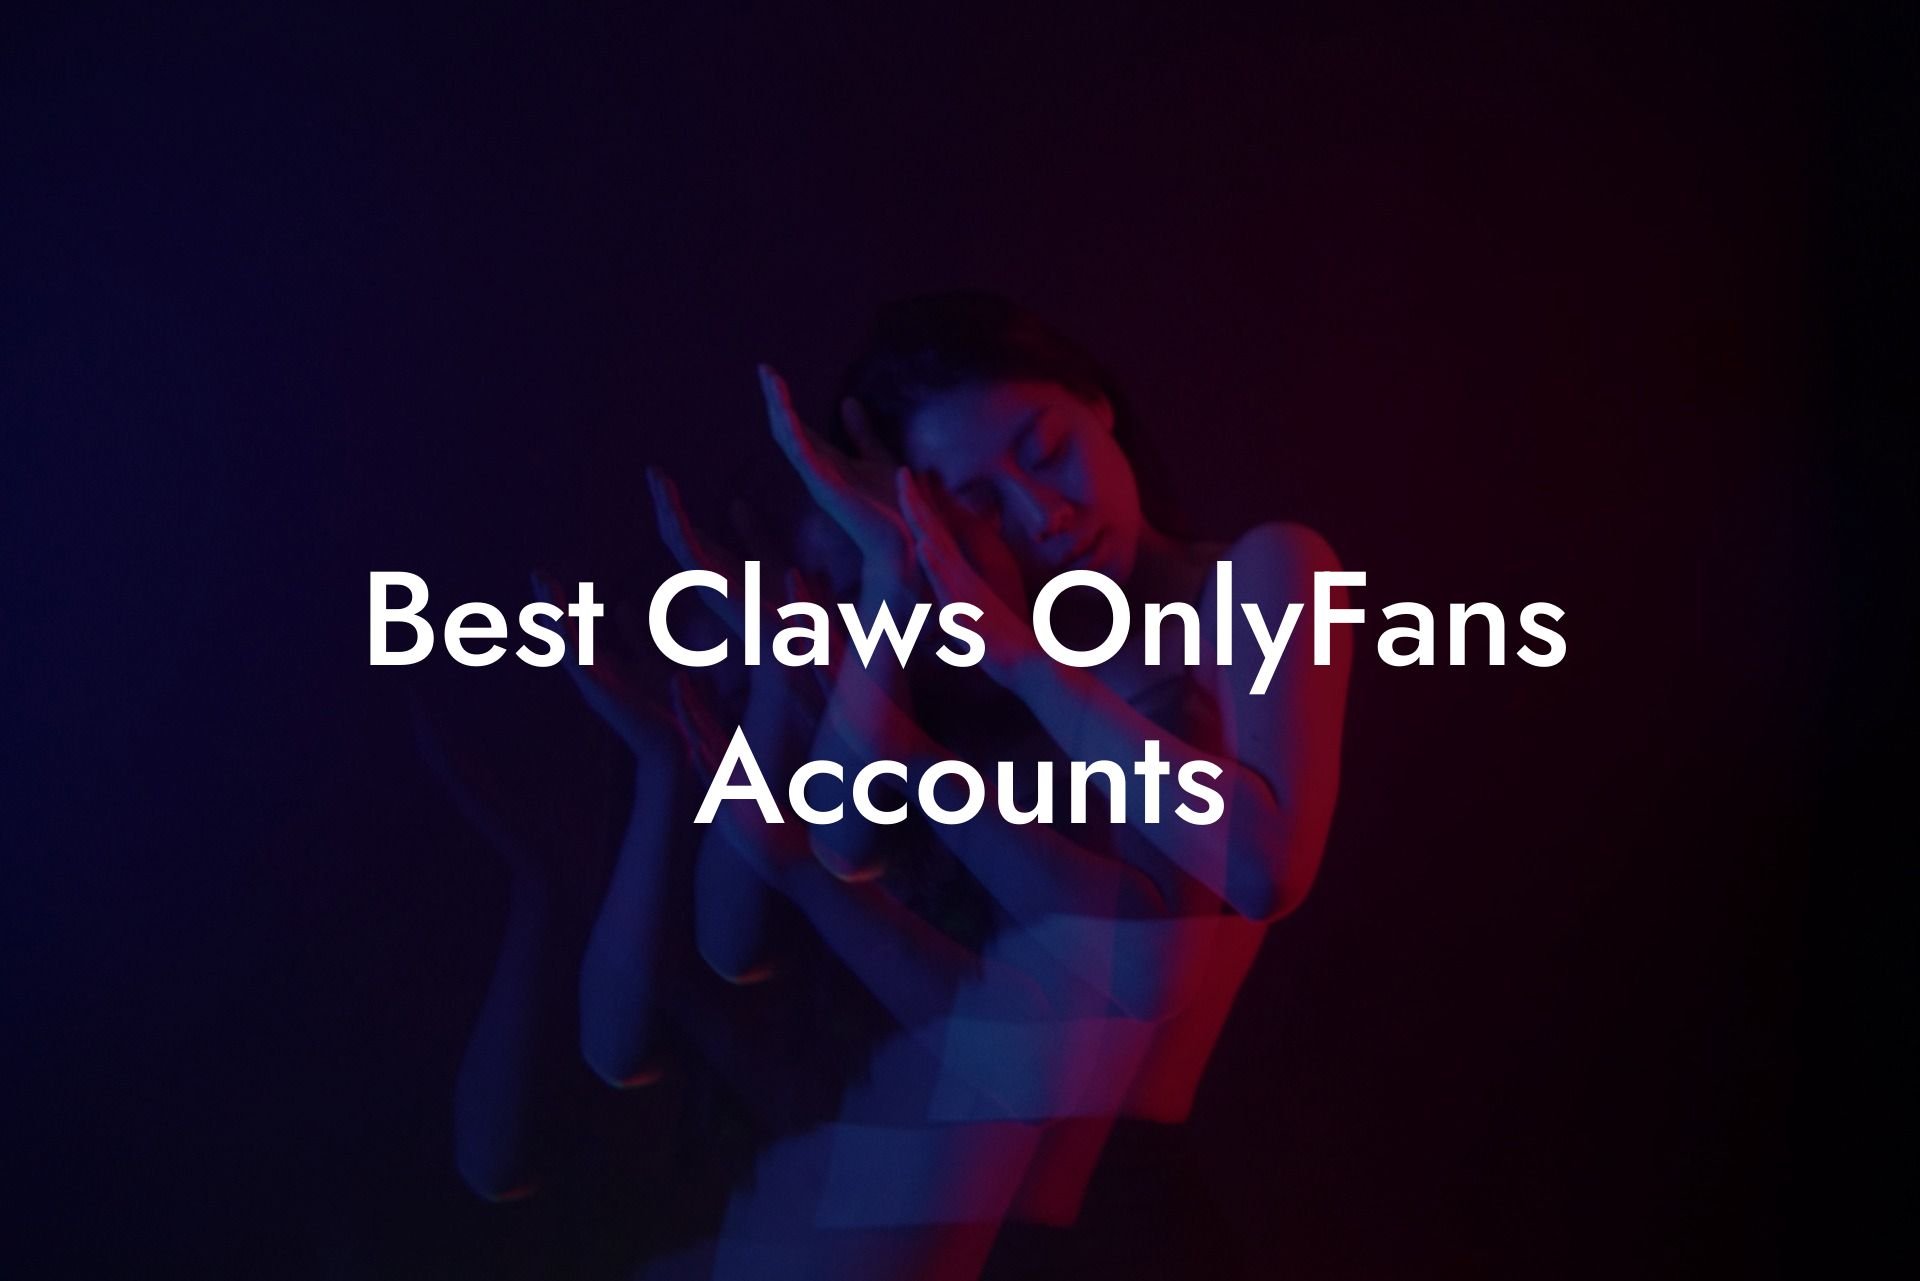 Best Claws OnlyFans Accounts